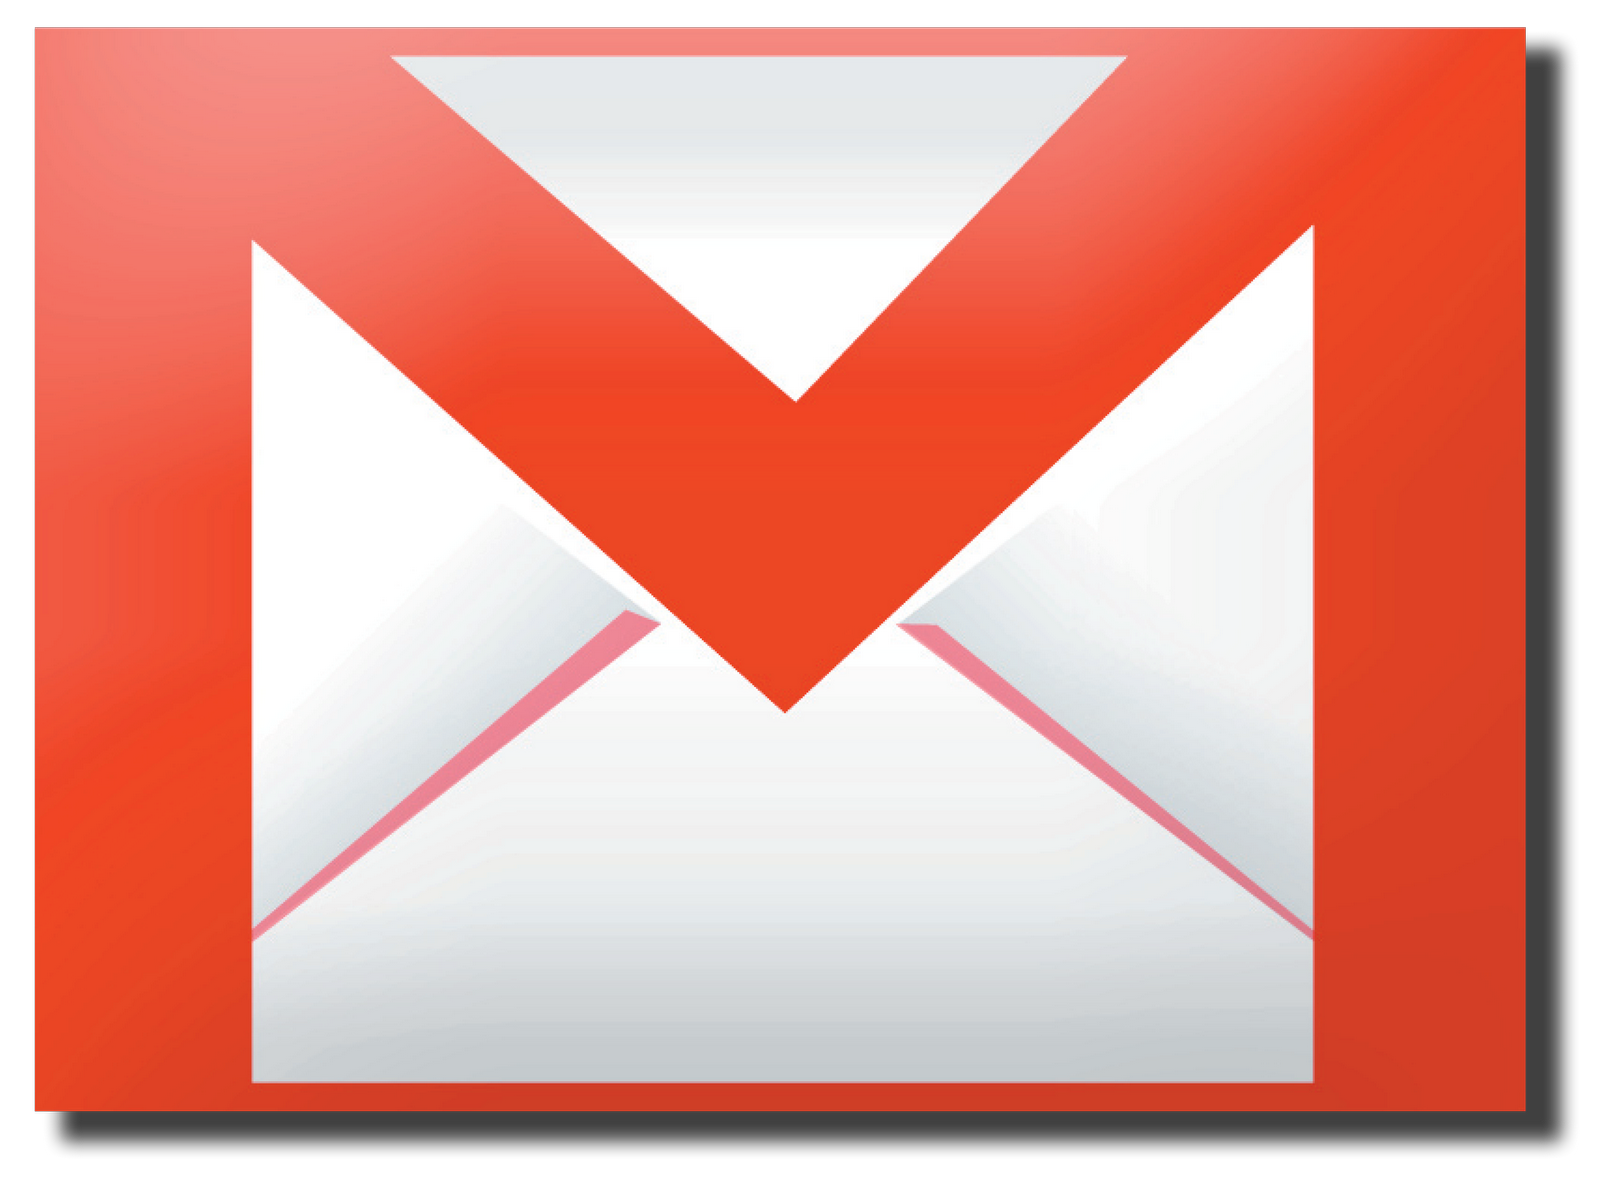 Gmail Becomes World’s First Android App With 1 Billion Installs